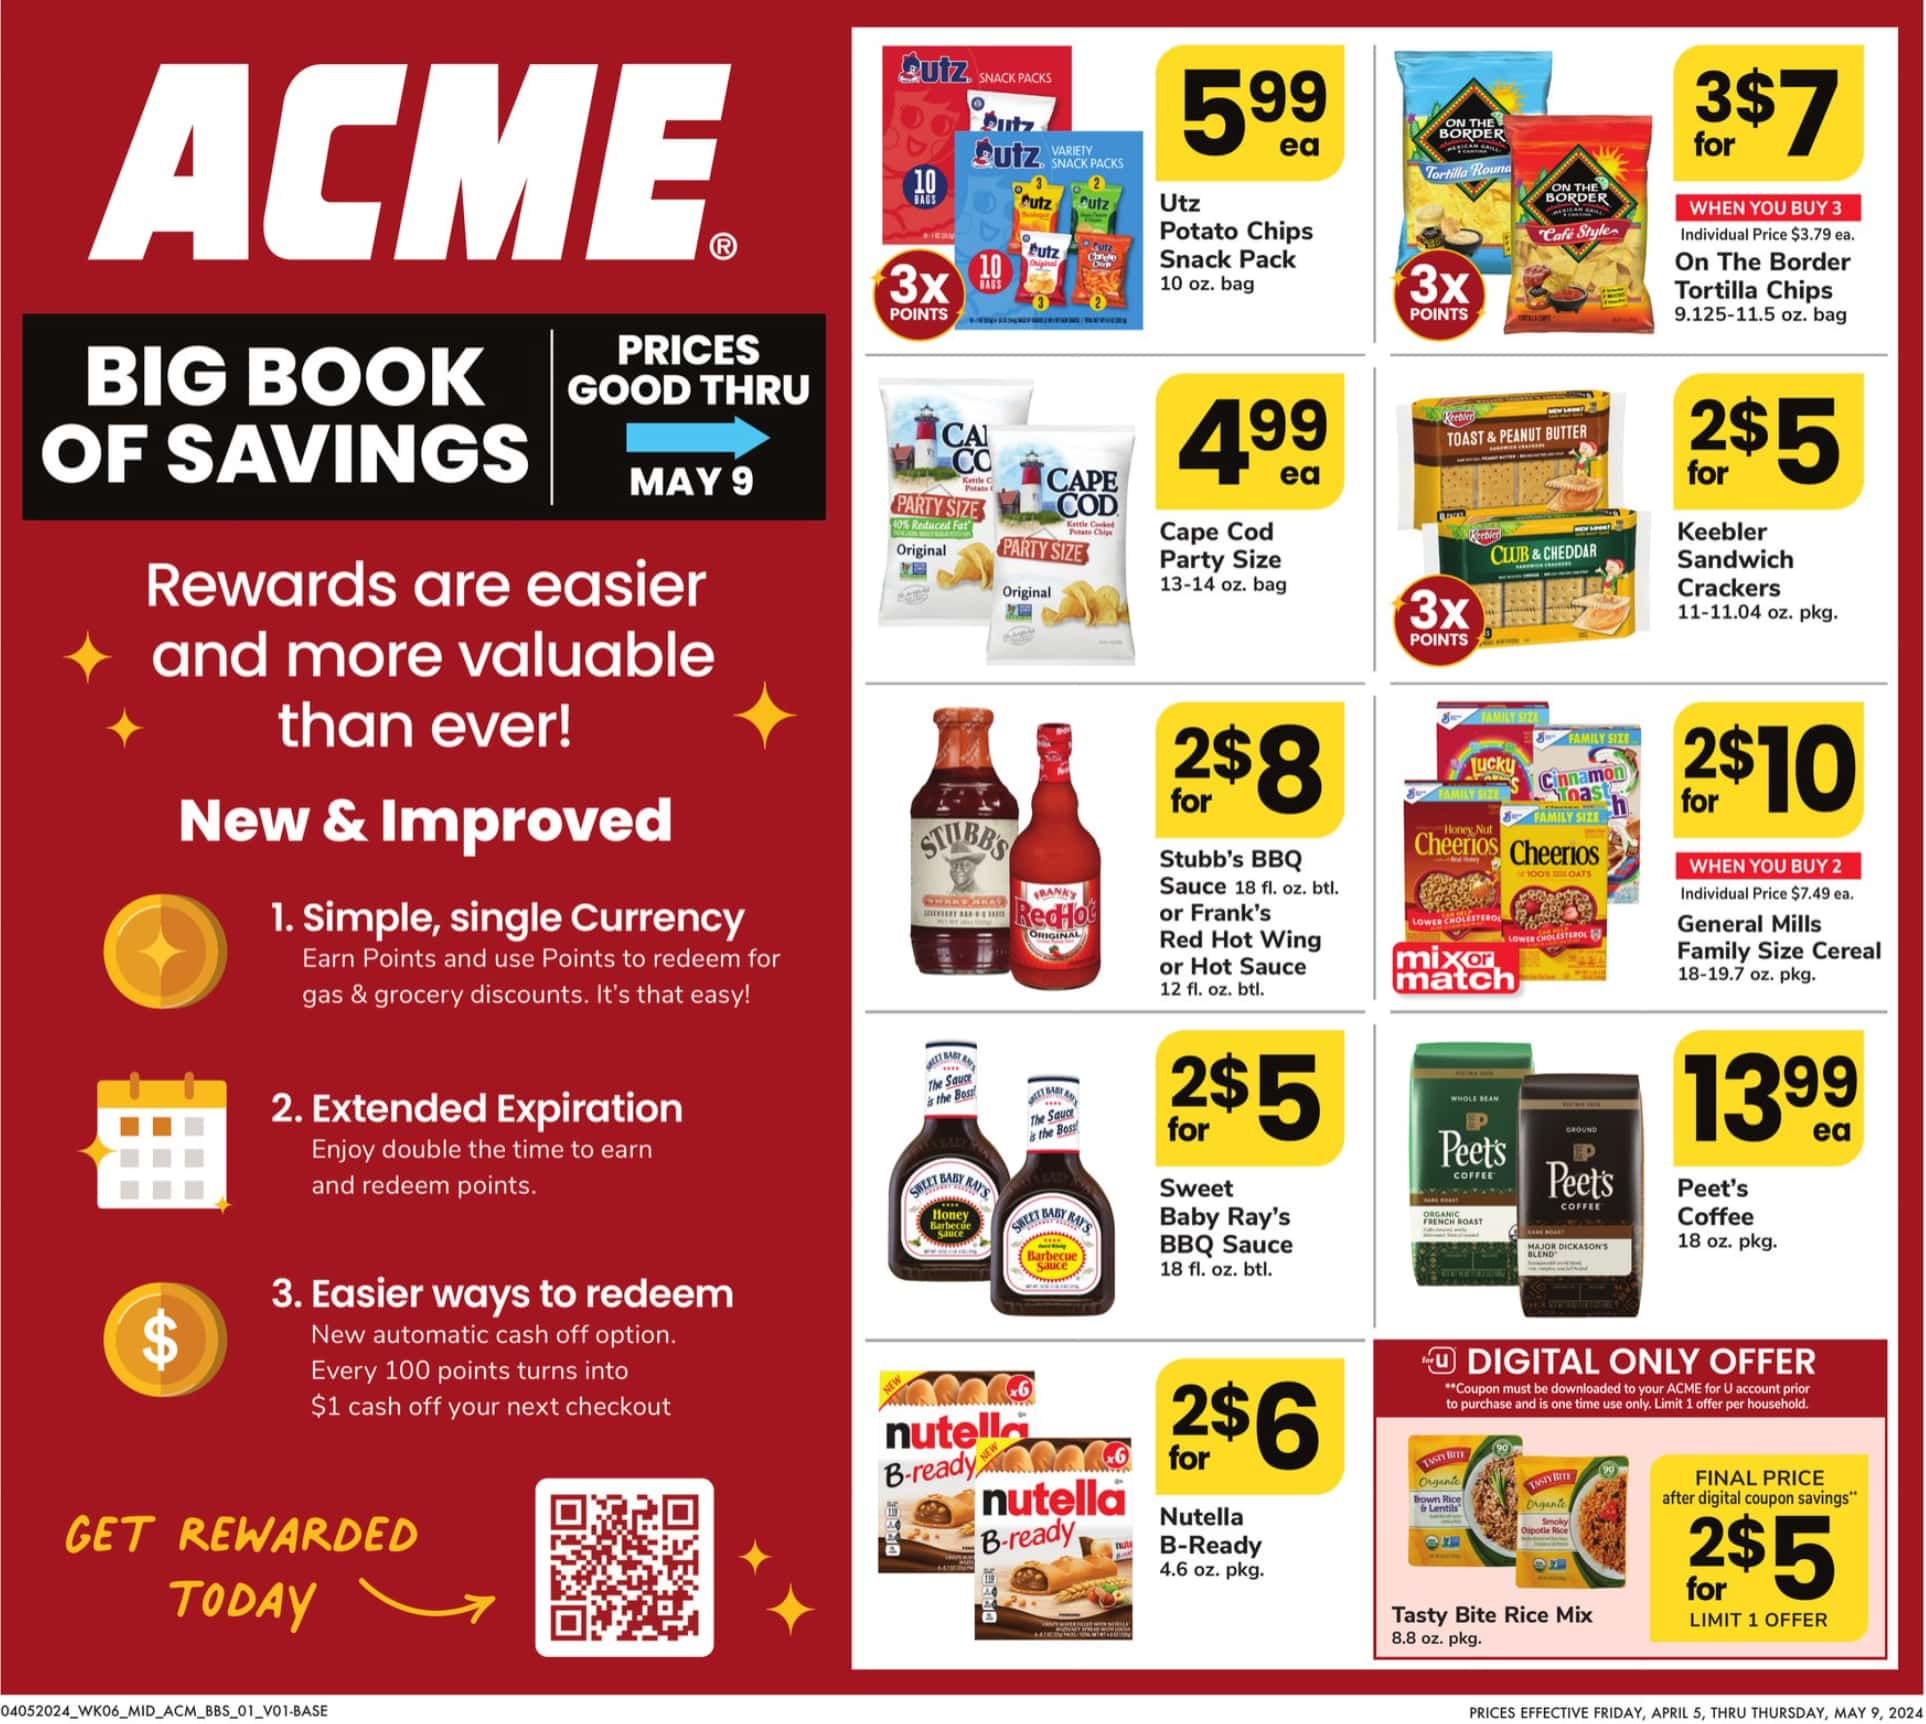 Acme_weekly_ad_040424_01